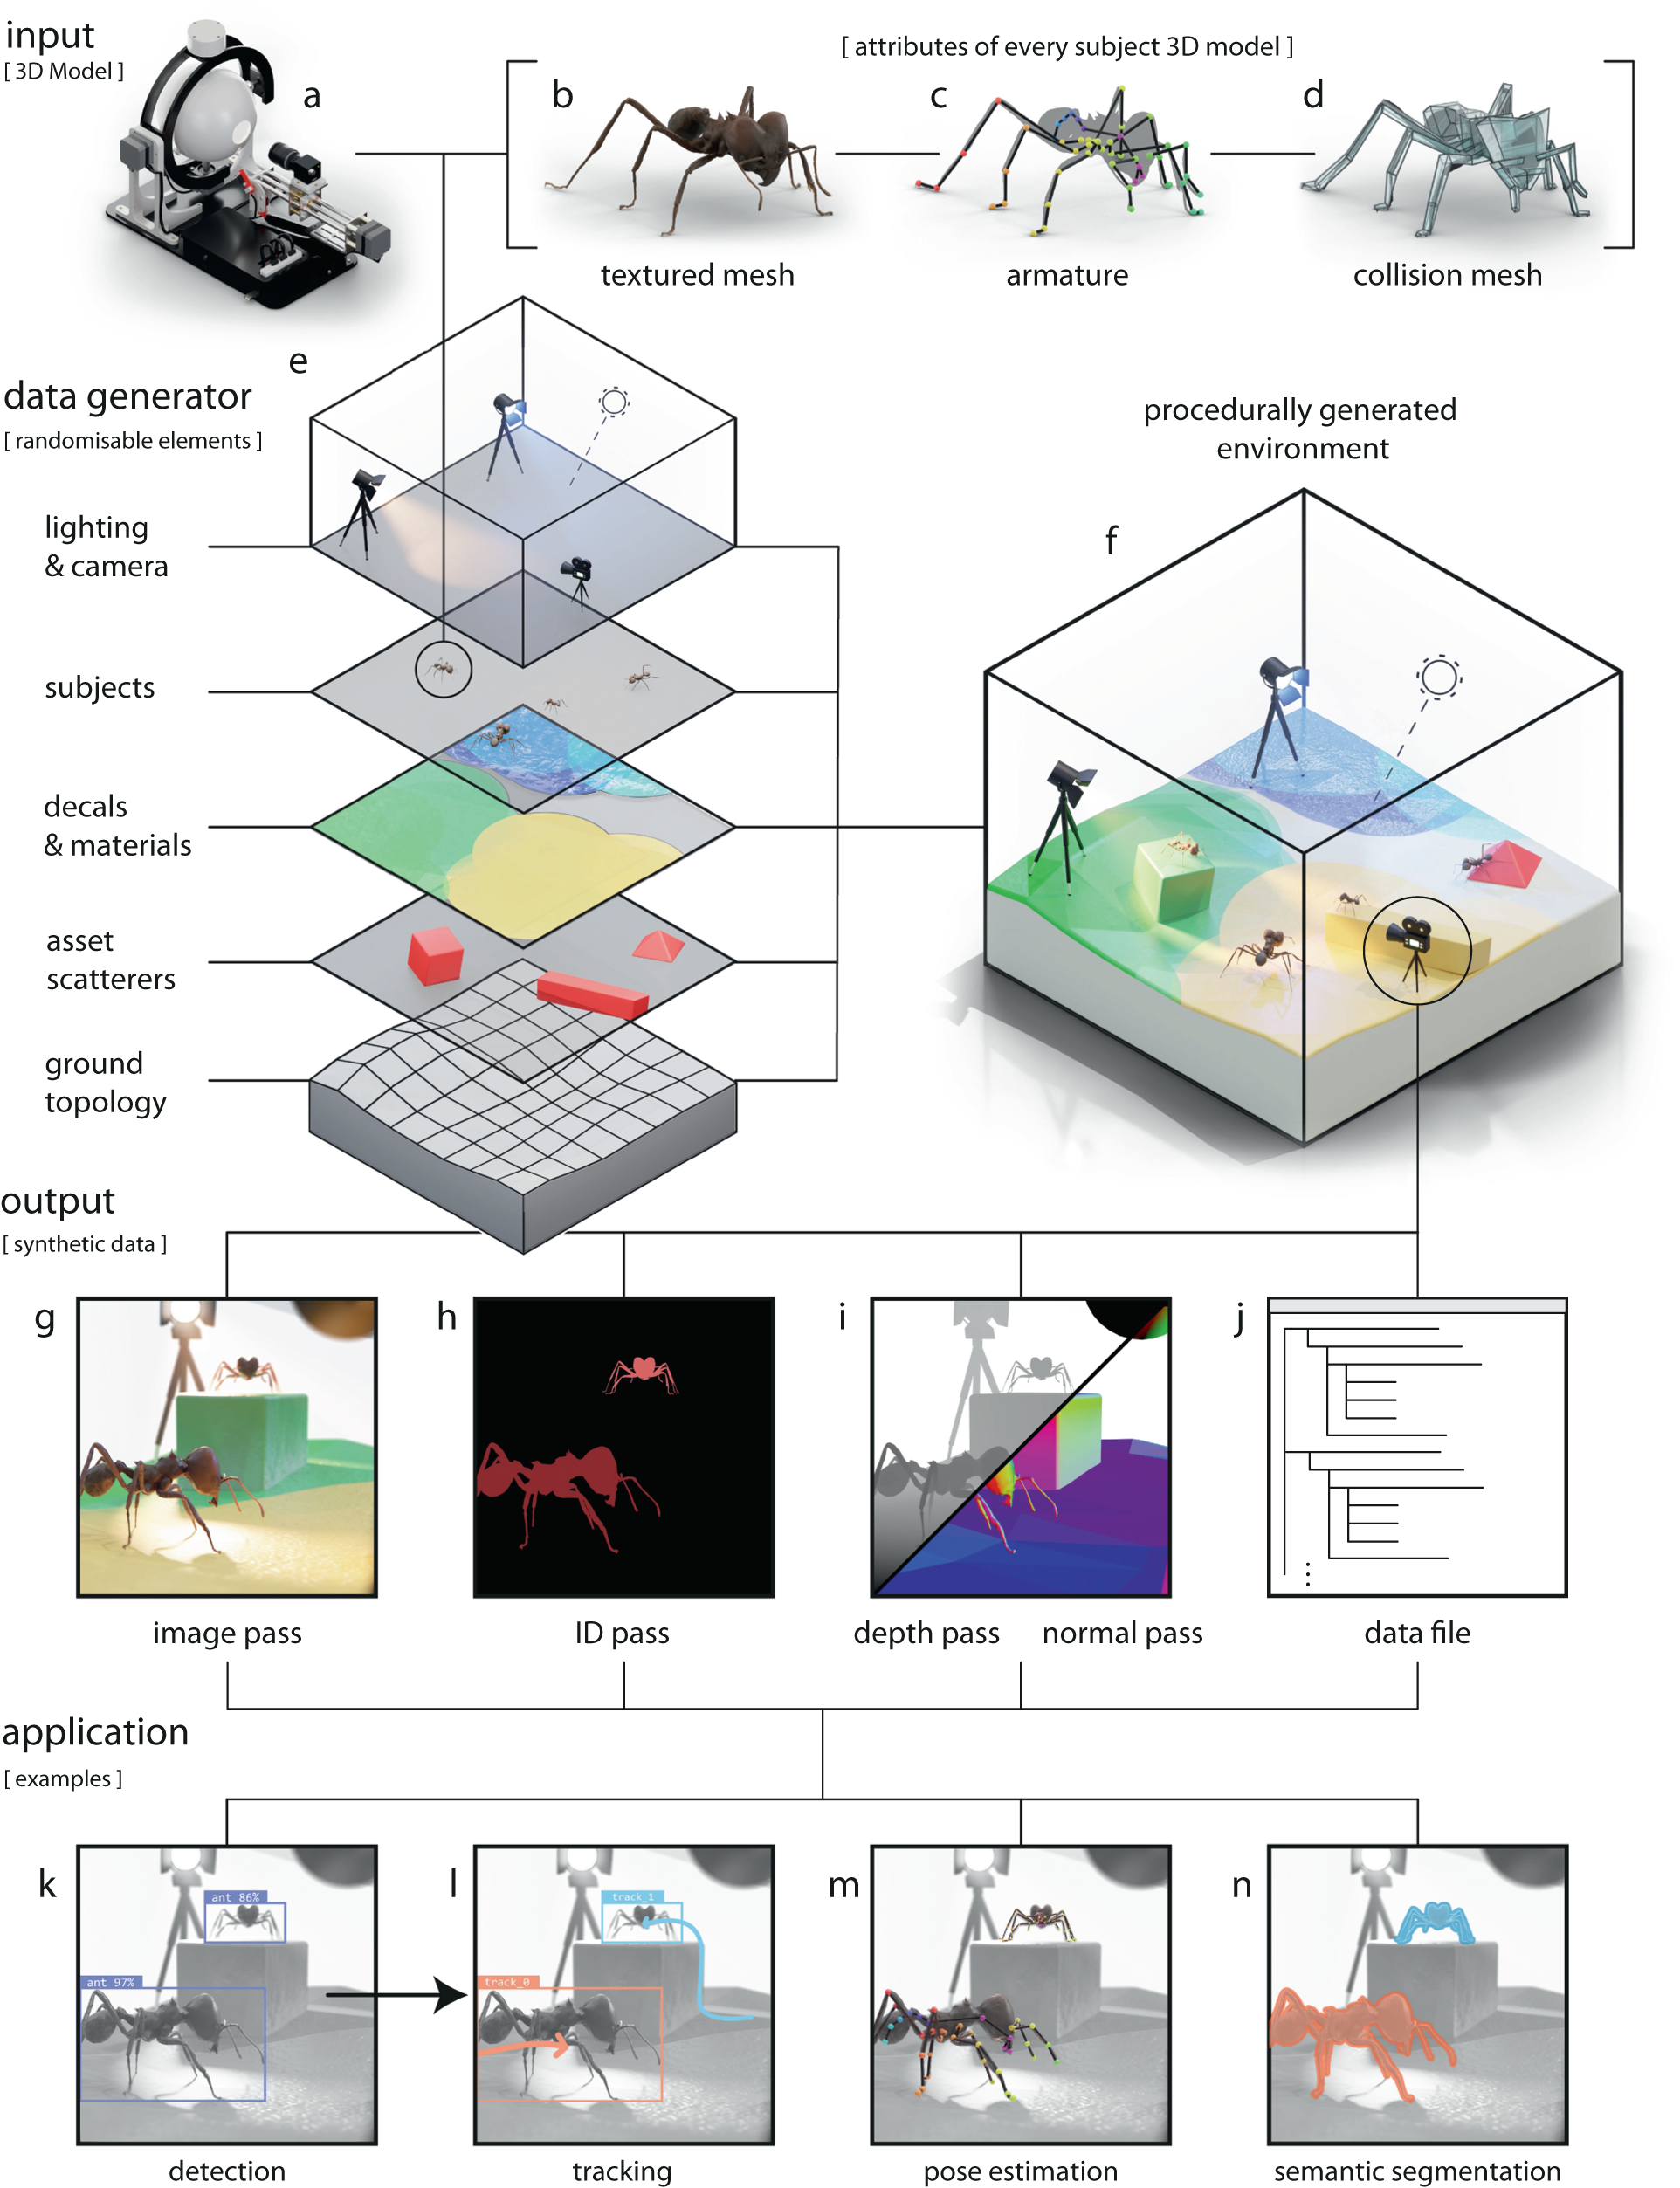 Mice recognize 3D objects from recalled 2D pictures, support for  picture-object equivalence